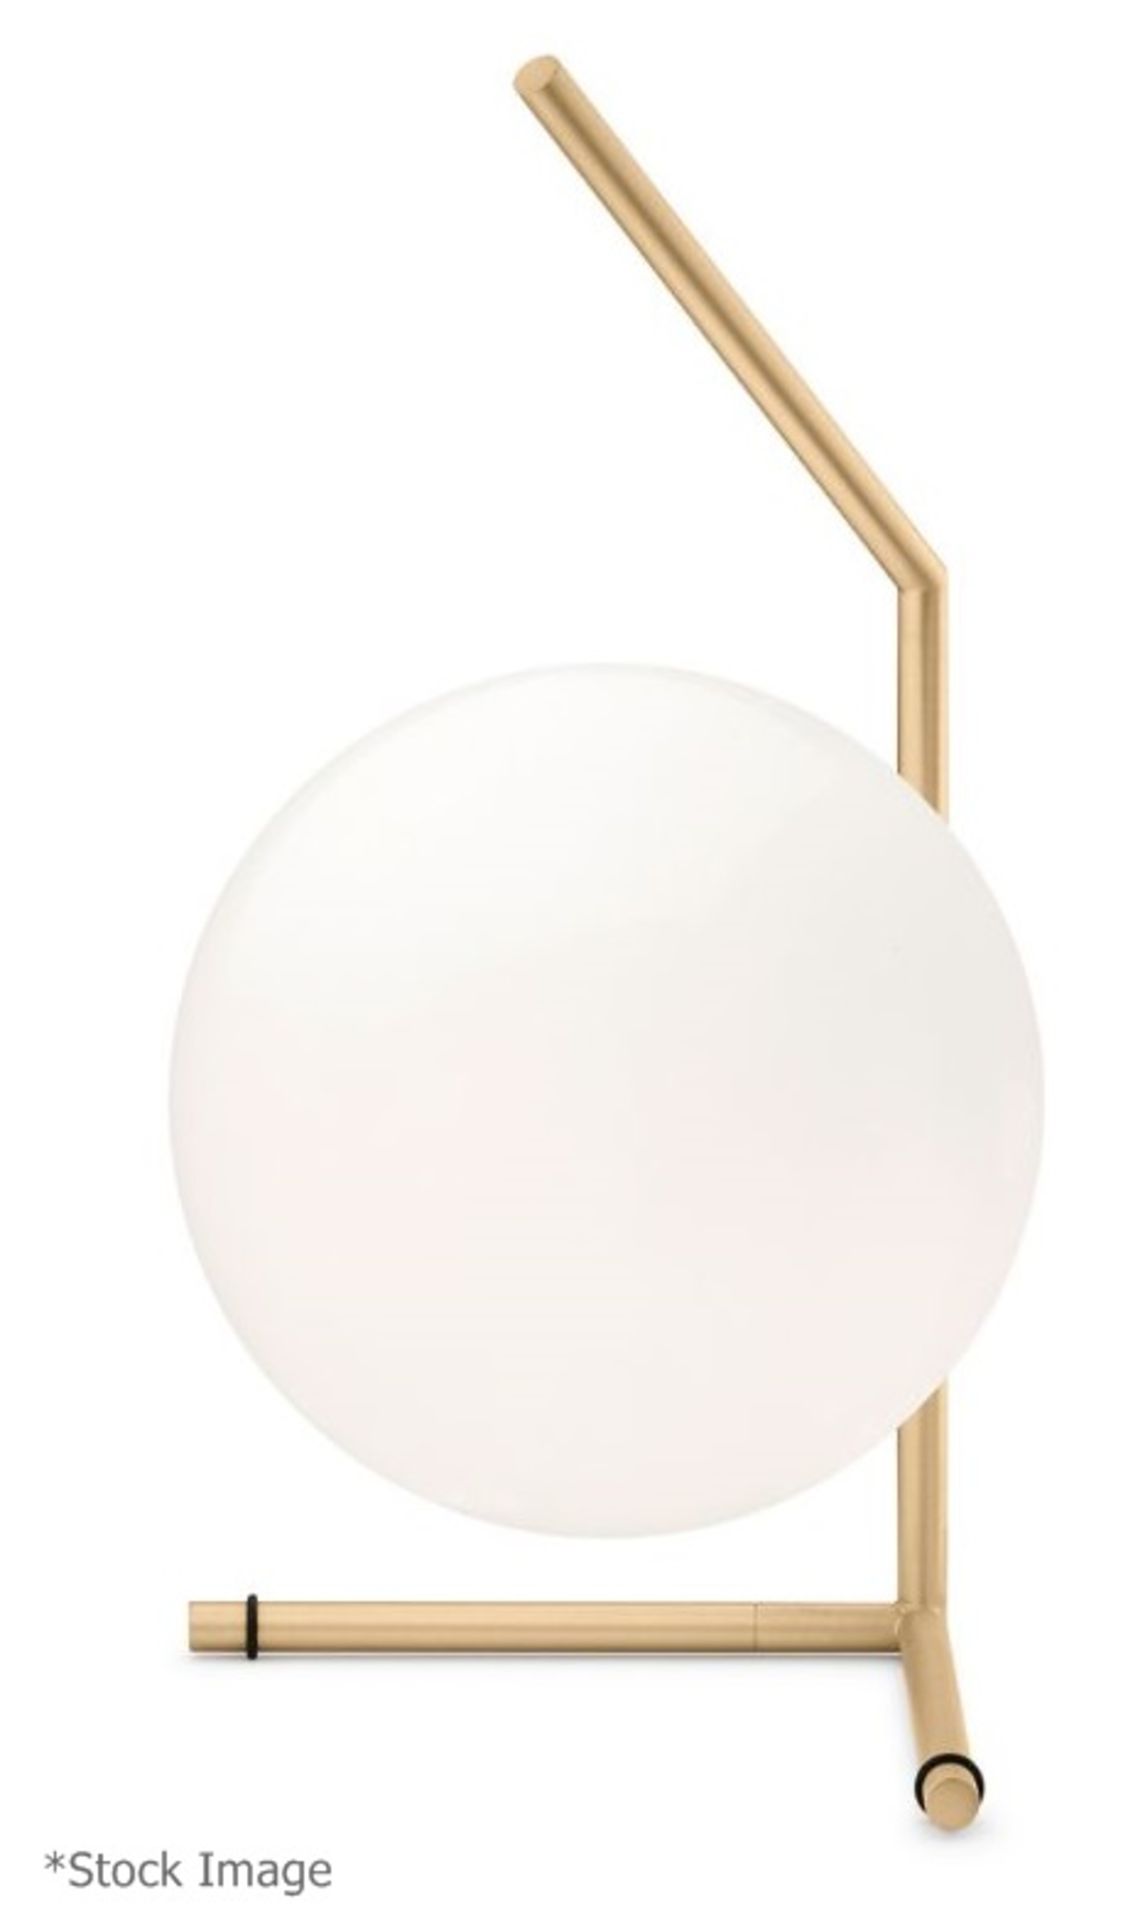 1 x FLOS 'IC T1' Luxury Designer Low Table Lamp With Opal Shade - Original Price £340.00 - Image 2 of 12